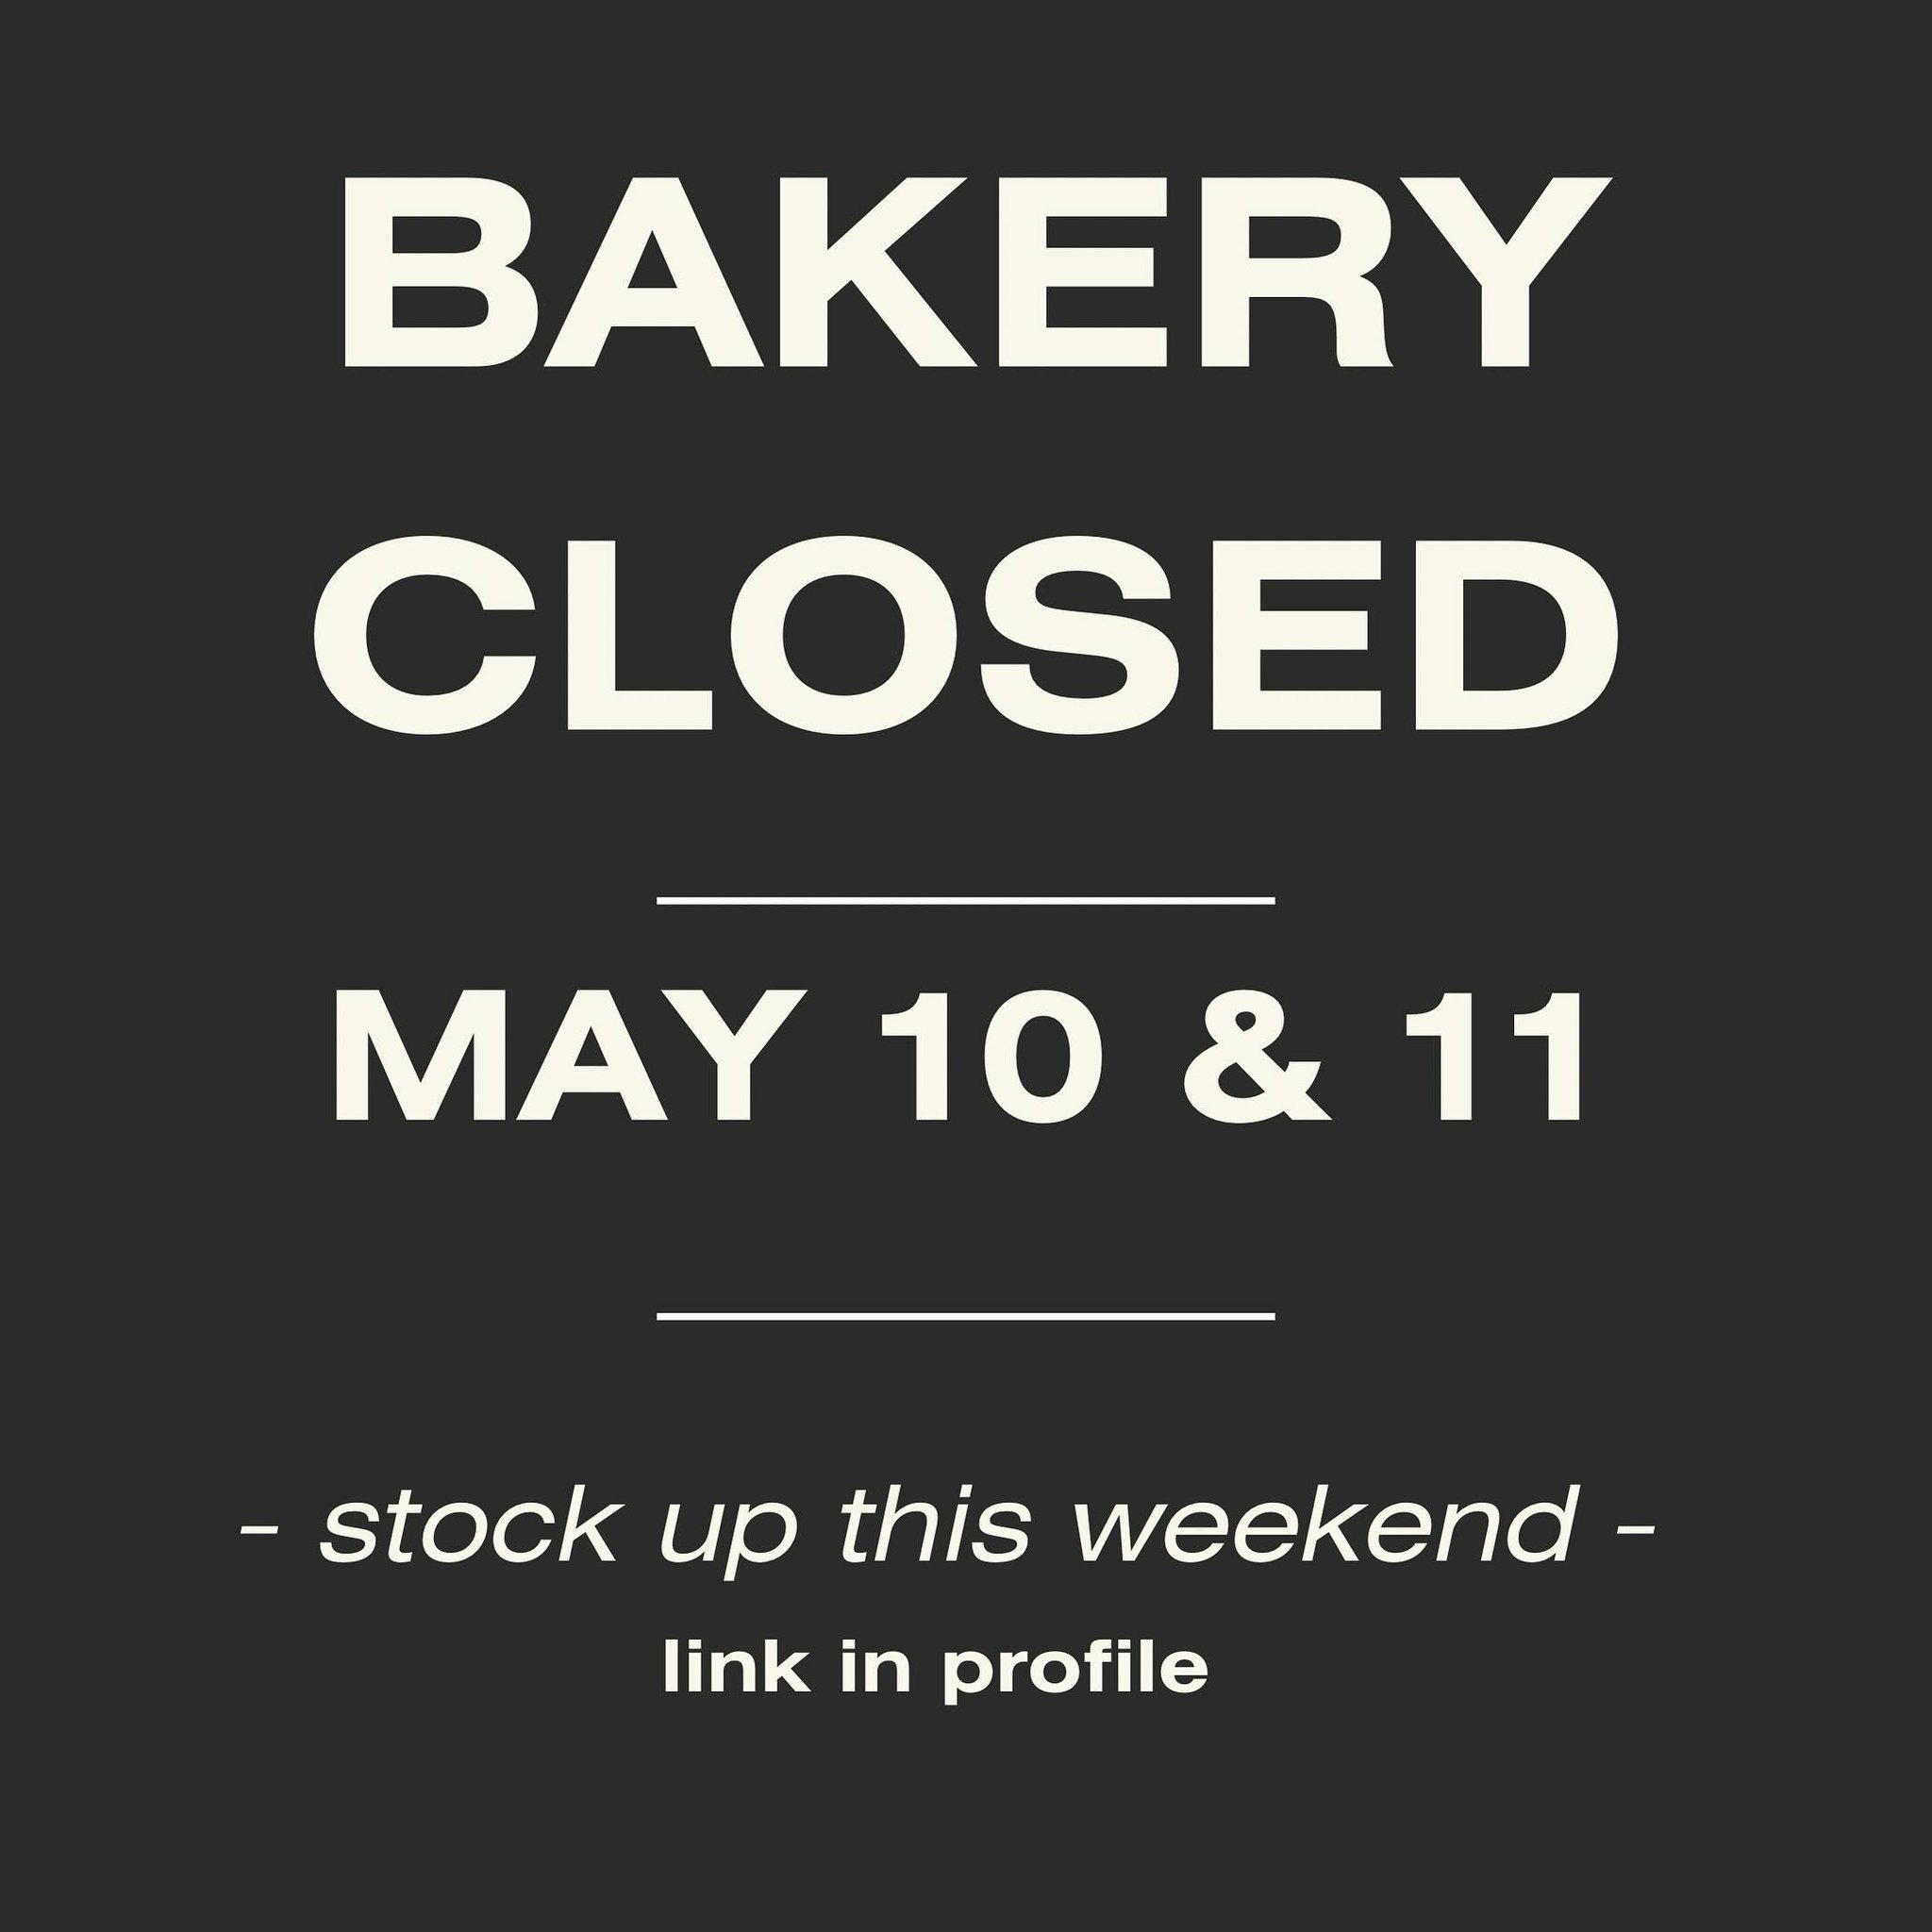 A friendly reminder that @unionstsourdough will be CLOSED next weekend, May 10th and 11th, so make sure to stock up this weekend (link in profile 👆) to get you through until my return. Remember - bagels freeze exceptionally well (pre slice and put i